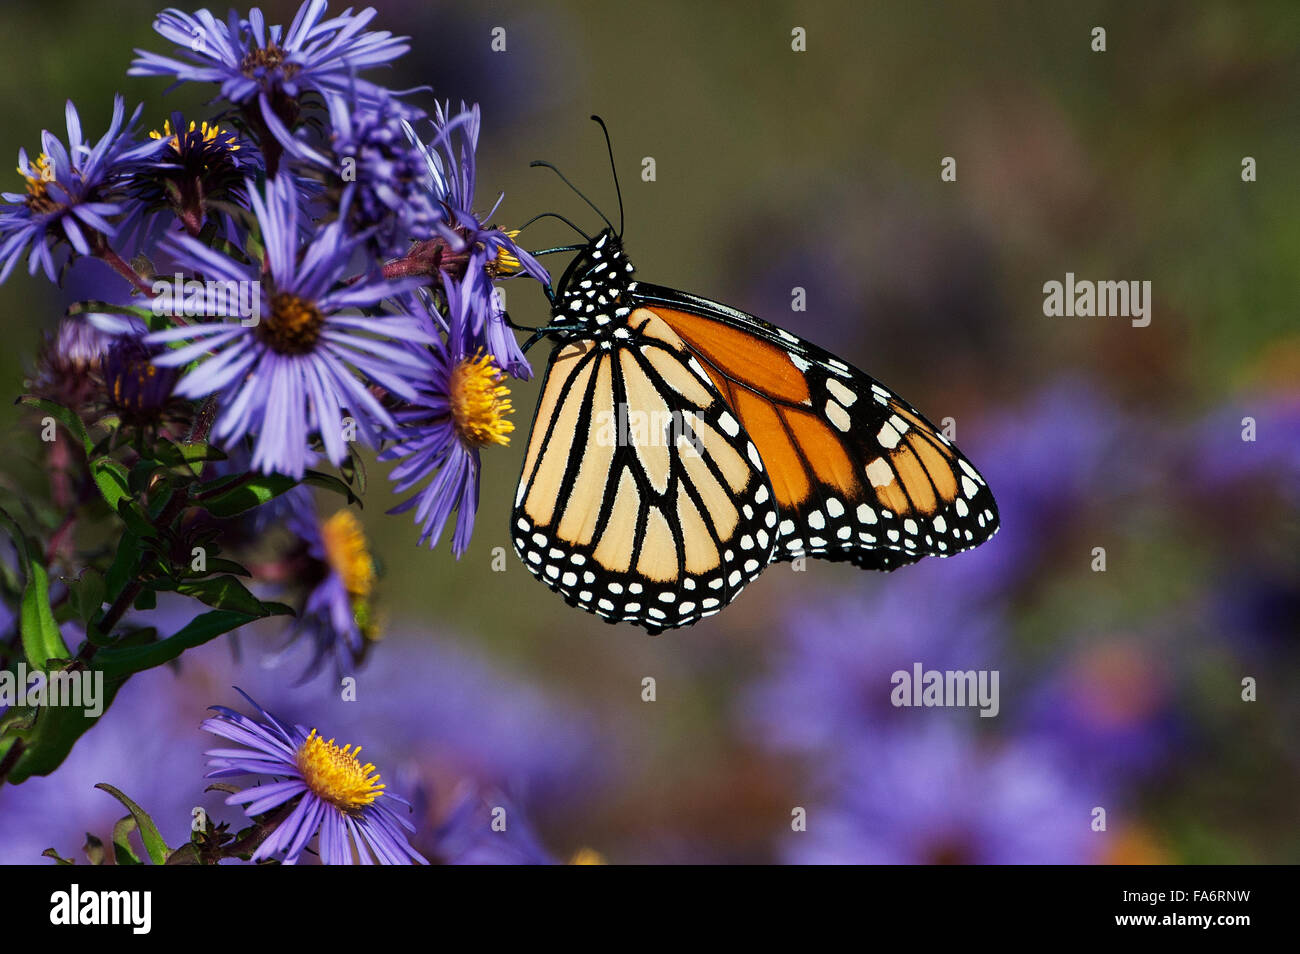 Monarch butterfly nectaring on New England aster during autumn migration Stock Photo